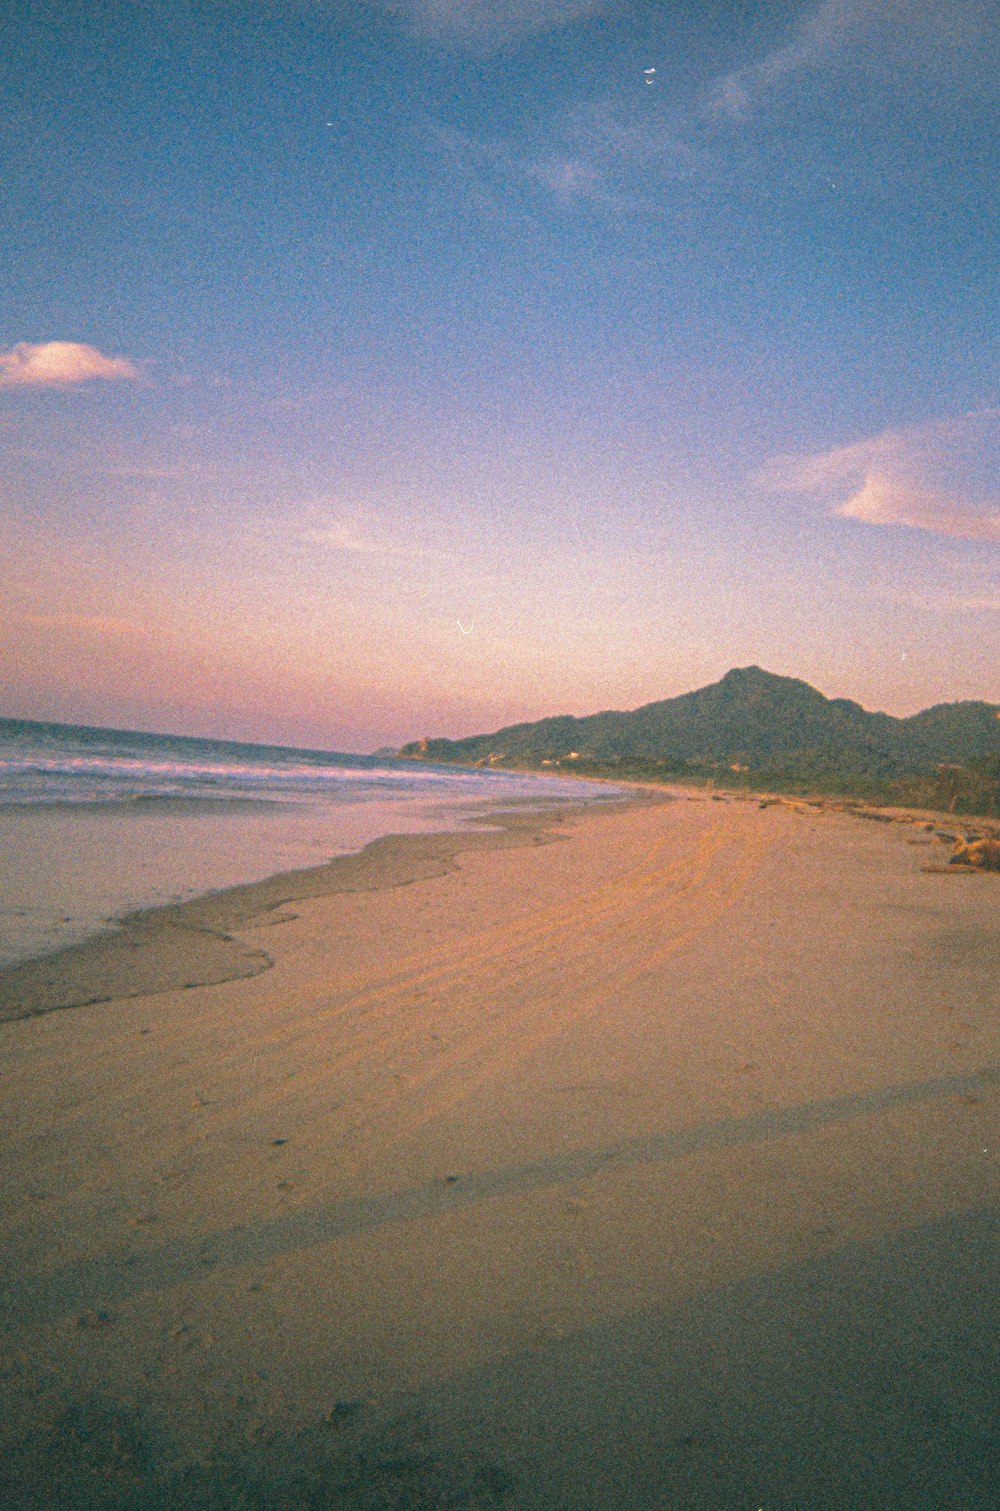 a sandy beach with mountains in the distance